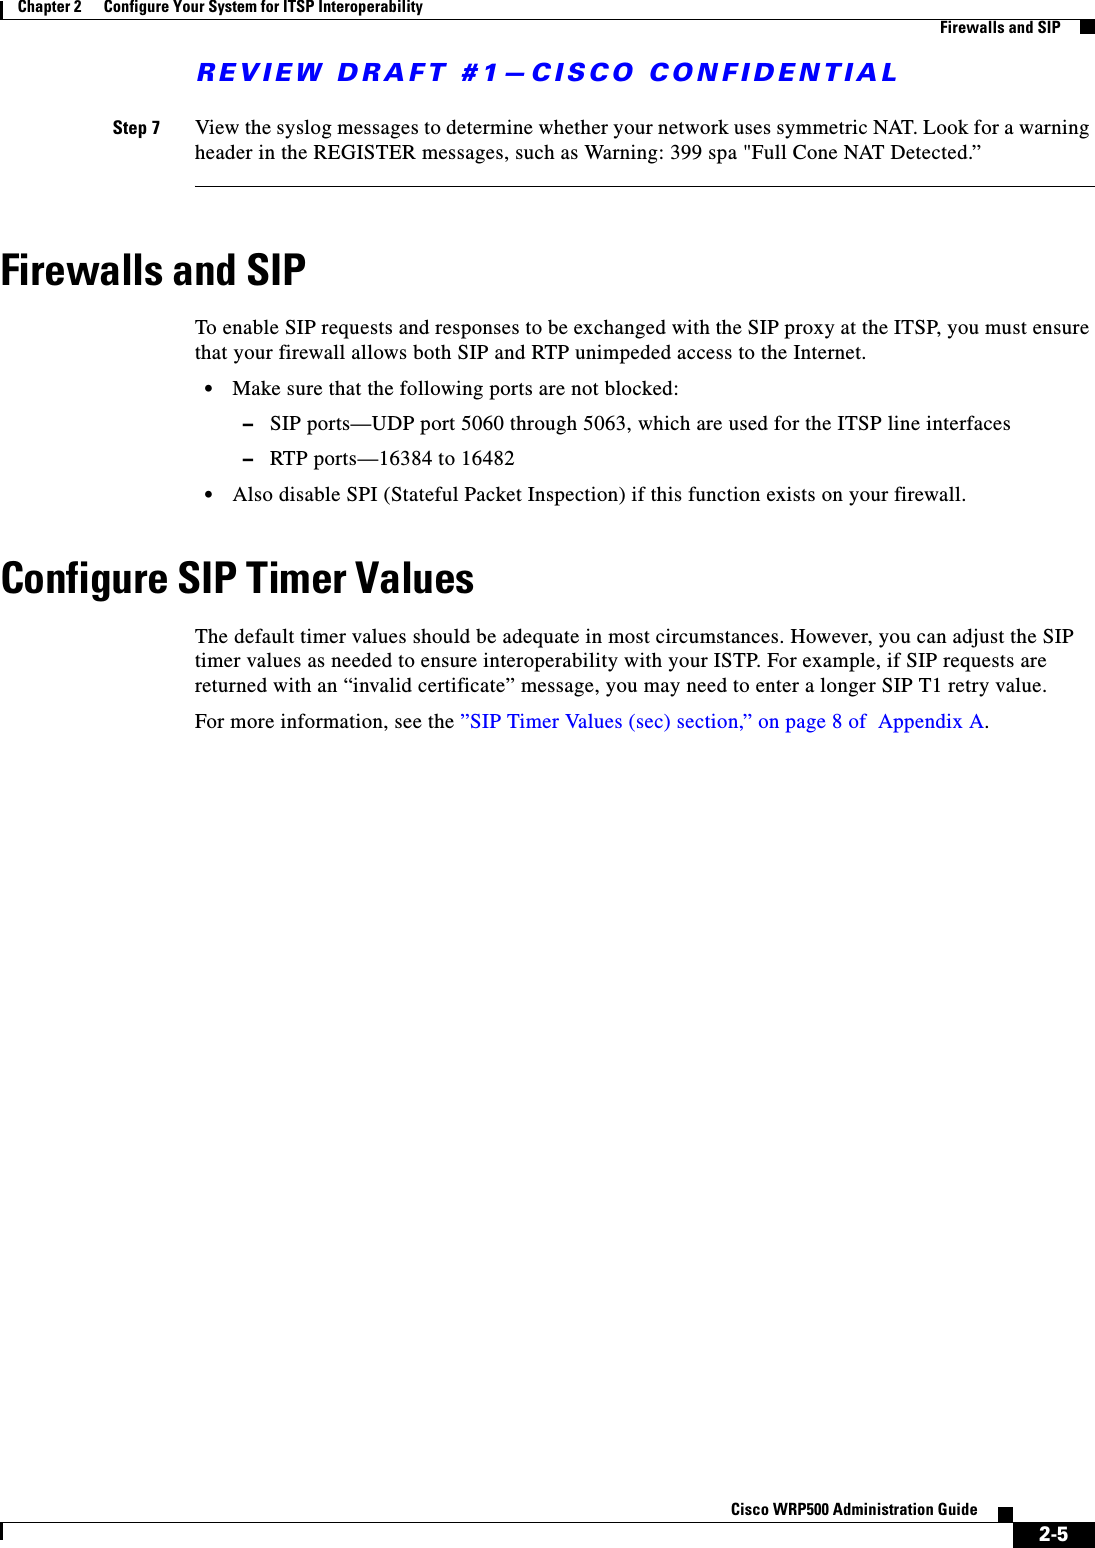 REVIEW DRAFT #1—CISCO CONFIDENTIAL2-5Cisco WRP500 Administration Guide Chapter 2      Configure Your System for ITSP Interoperability  Firewalls and SIPStep 7 View the syslog messages to determine whether your network uses symmetric NAT. Look for a warning header in the REGISTER messages, such as Warning: 399 spa &quot;Full Cone NAT Detected.”Firewalls and SIPTo enable SIP requests and responses to be exchanged with the SIP proxy at the ITSP, you must ensure that your firewall allows both SIP and RTP unimpeded access to the Internet. •Make sure that the following ports are not blocked: –SIP ports—UDP port 5060 through 5063, which are used for the ITSP line interfaces–RTP ports—16384 to 16482•Also disable SPI (Stateful Packet Inspection) if this function exists on your firewall. Configure SIP Timer ValuesThe default timer values should be adequate in most circumstances. However, you can adjust the SIP timer values as needed to ensure interoperability with your ISTP. For example, if SIP requests are returned with an “invalid certificate” message, you may need to enter a longer SIP T1 retry value. For more information, see the ”SIP Timer Values (sec) section,” on page 8 of  Appendix A.